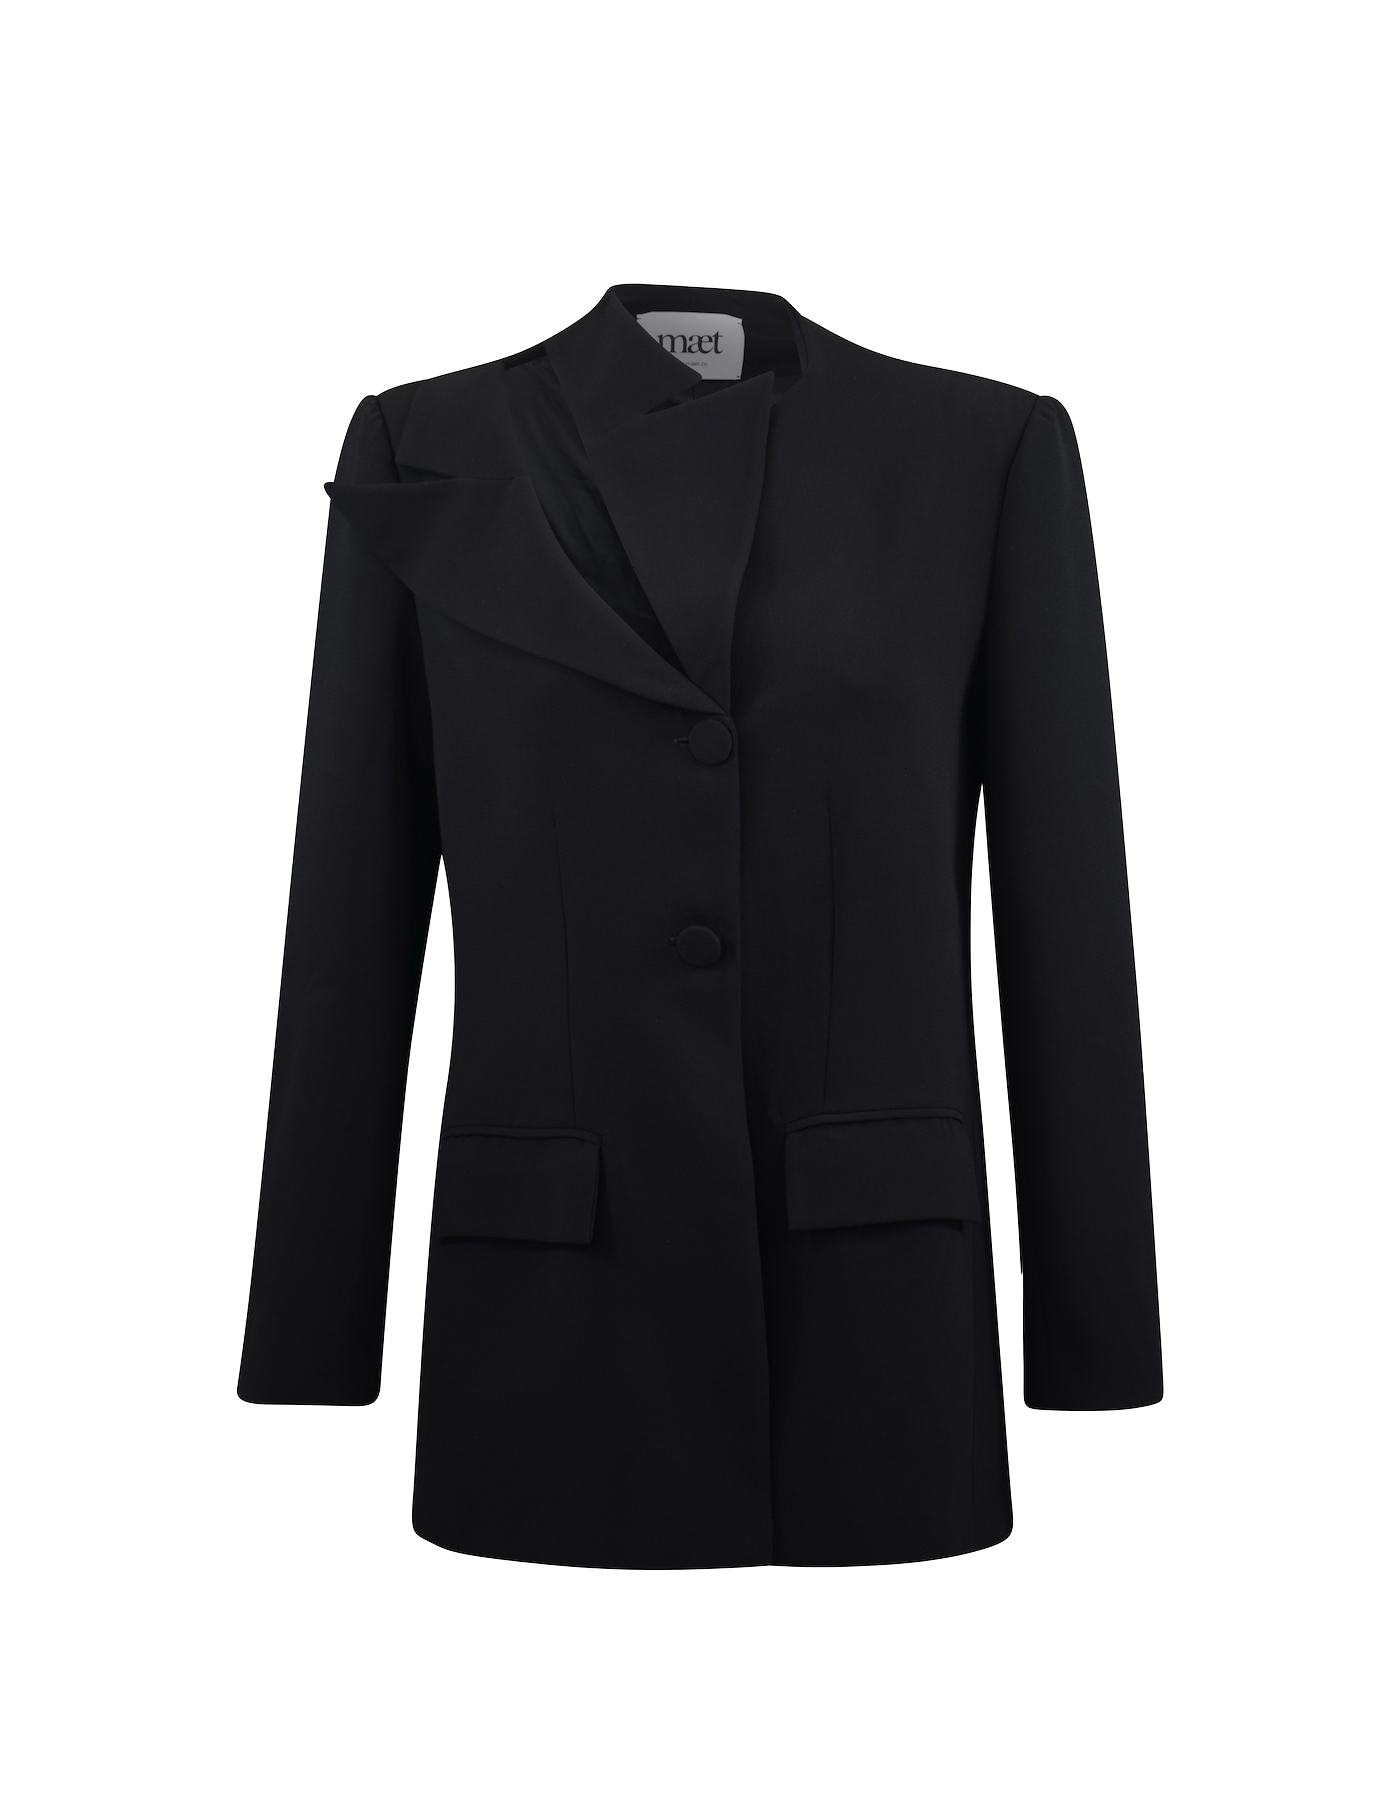 Maet Zane Jacket With Cut Out Lapel In Black